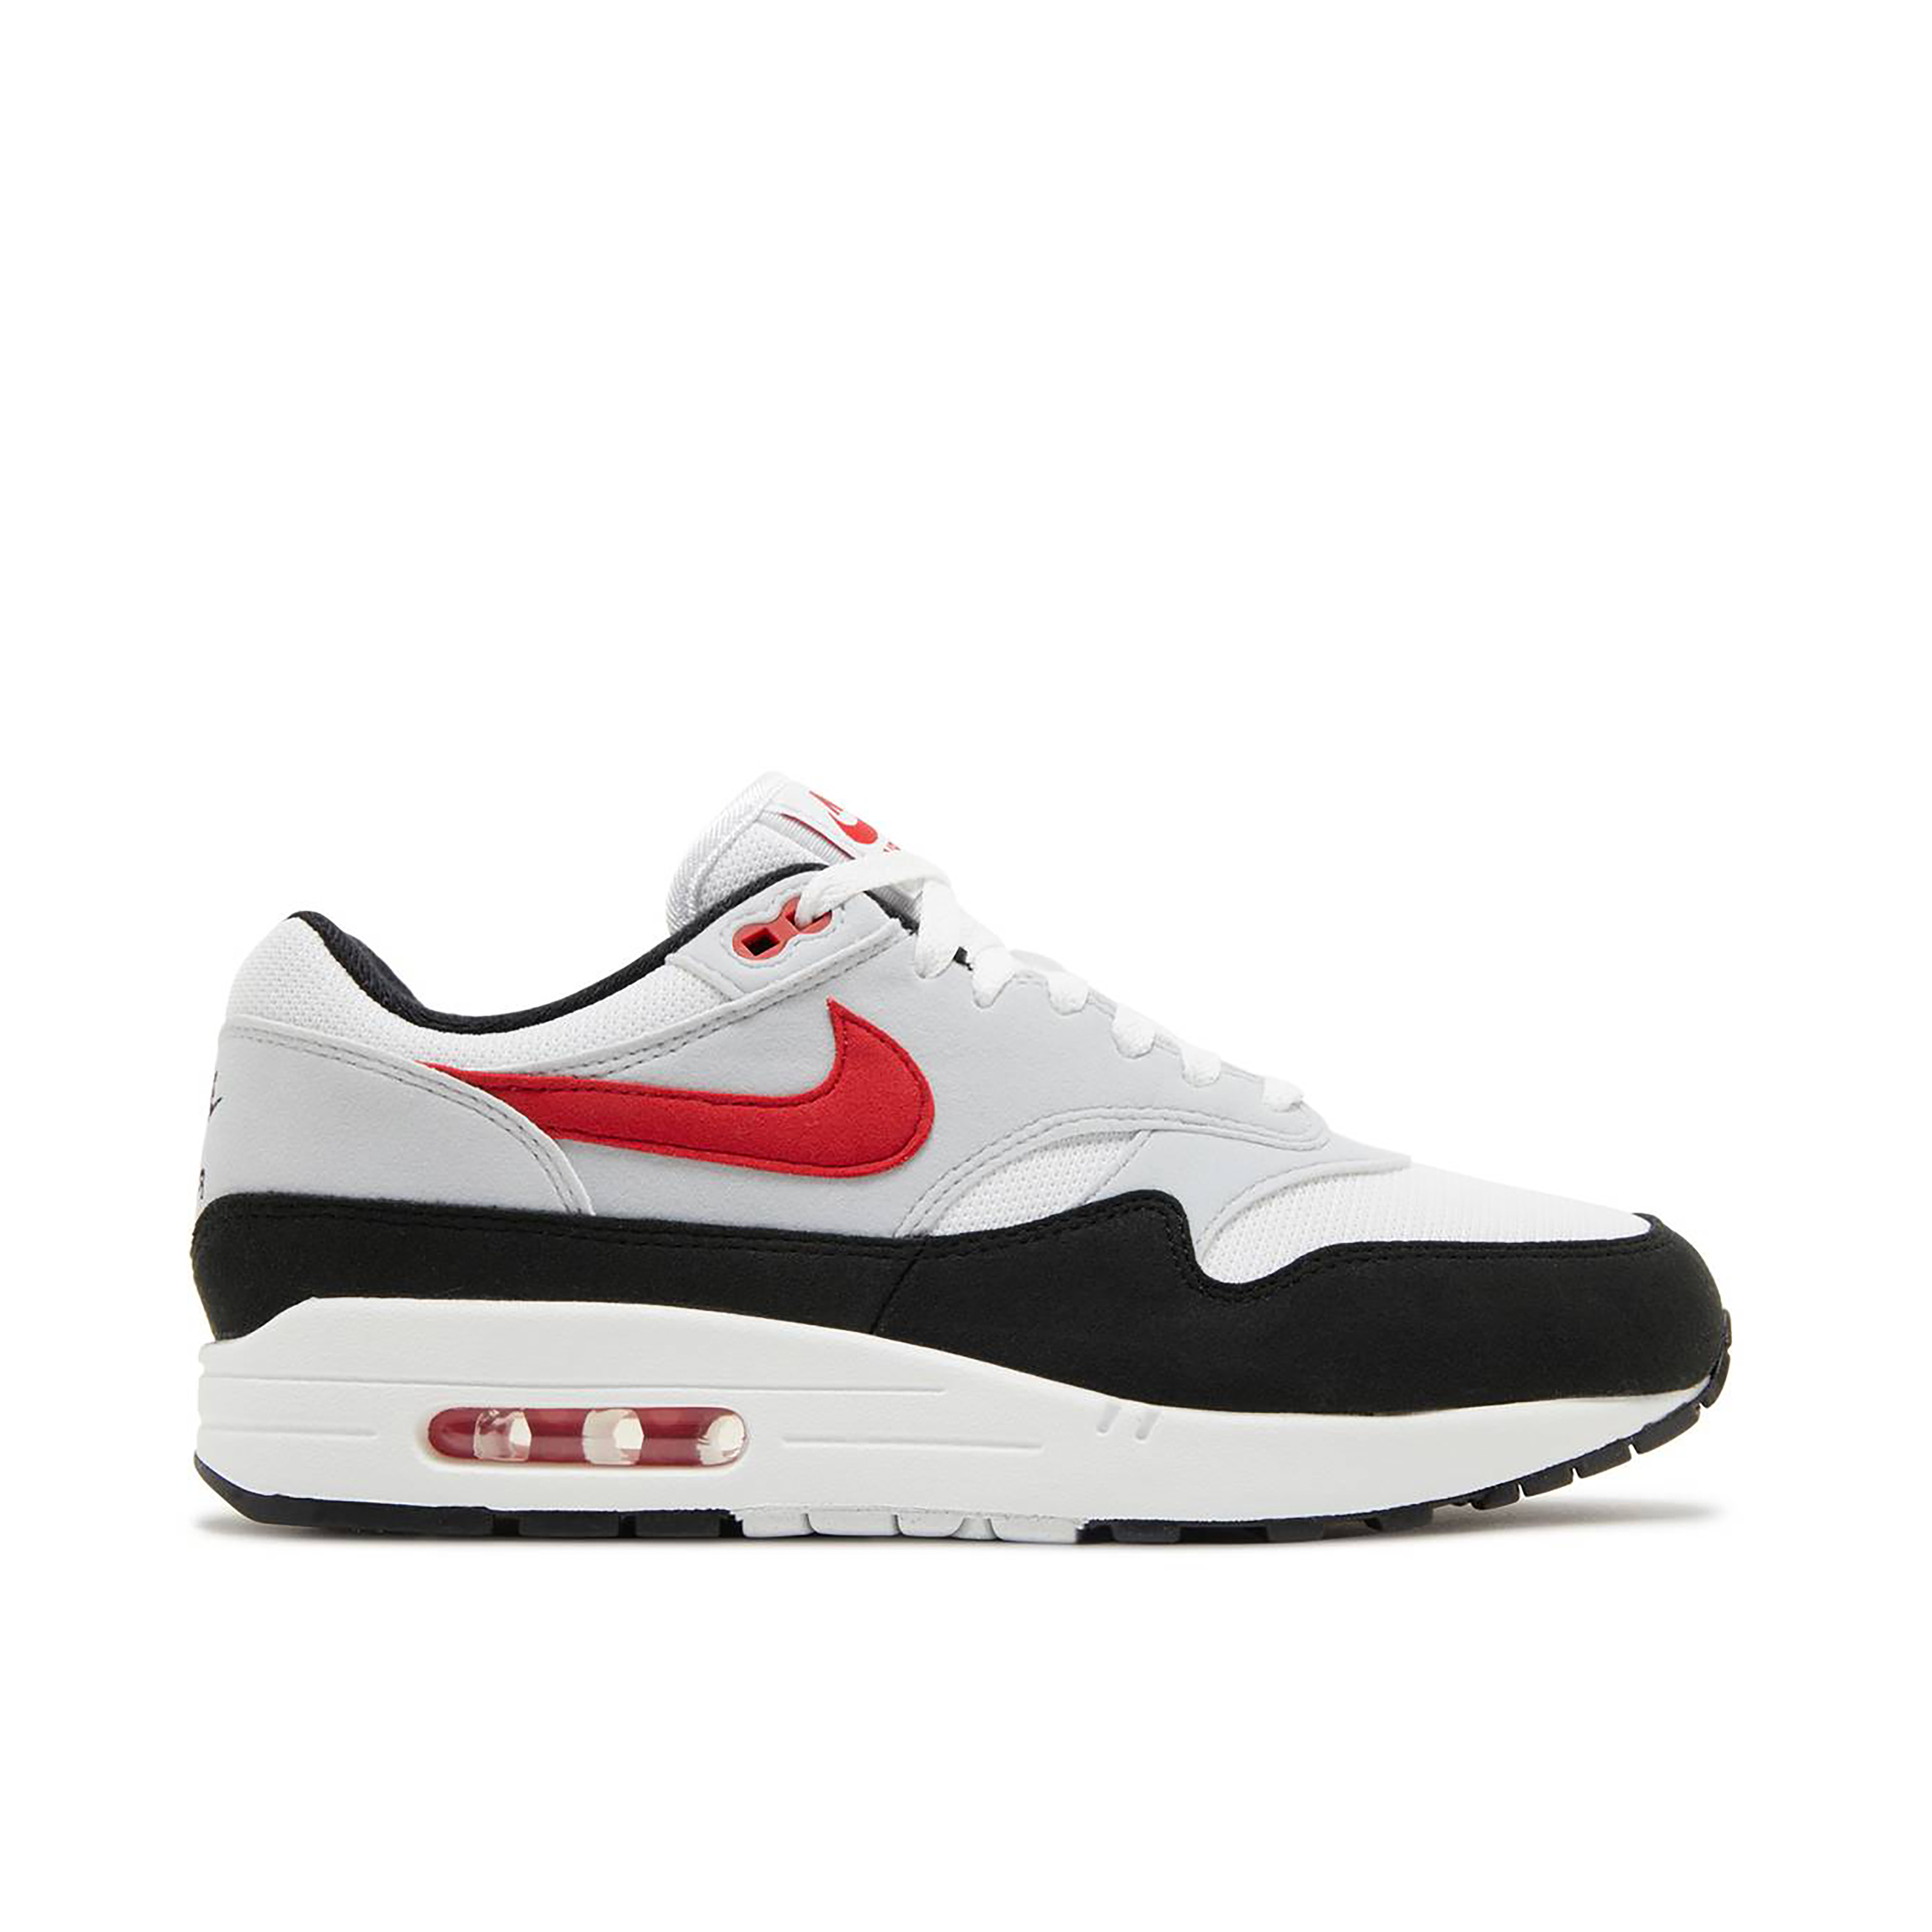 Air Max 1 OG Anniversary Obsidian | 908375-104 | Laced